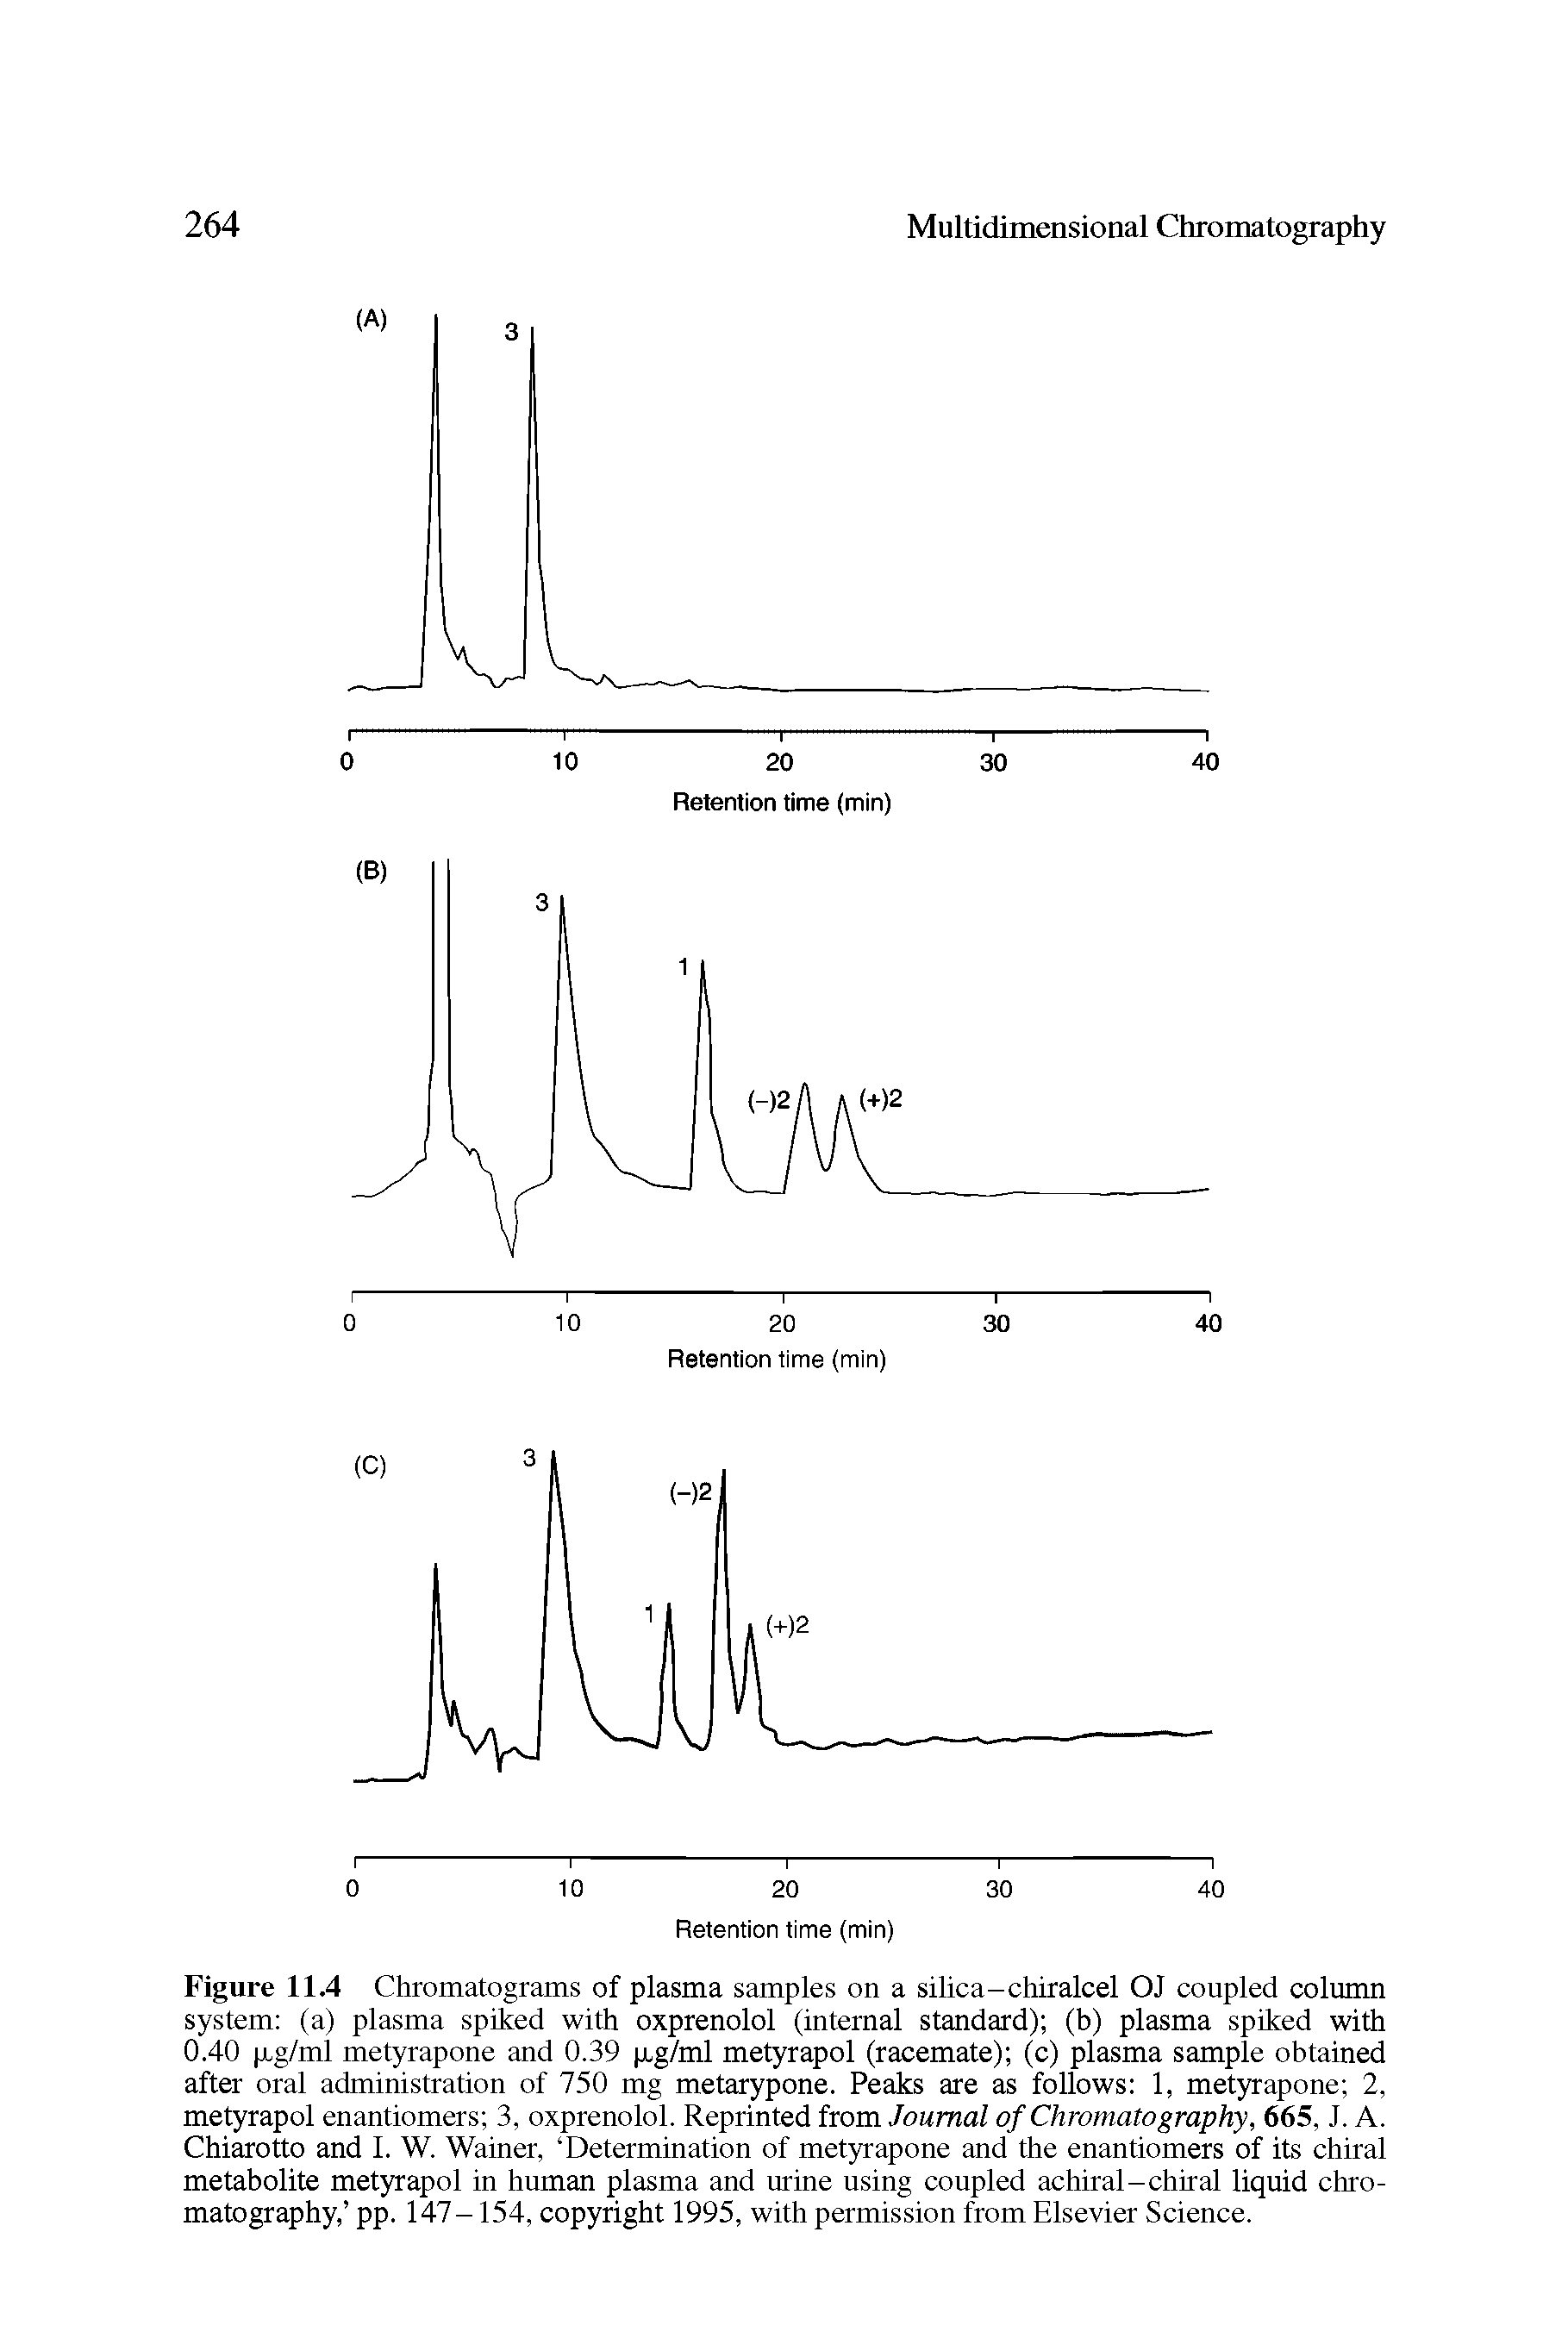 Figure 11.4 Chromatograms of plasma samples on a silica-chiralcel OJ coupled column system (a) plasma spiked with oxprenolol (internal standard) (b) plasma spiked with 0.40 jxg/ml metyrapone and 0.39 p,g/ml metyrapol (racemate) (c) plasma sample obtained after oral administration of 750 mg metarypone. Peaks are as follows 1, metyrapone 2, metyrapol enantiomers 3, oxprenolol. Reprinted from Journal of Chromatography, 665, J. A. Chiarotto and I. W. Wainer, Determination of metyrapone and the enantiomers of its chiral metabolite metyrapol in human plasma and urine using coupled achiral-chiral liquid chromatography, pp. 147-154, copyright 1995, with permission from Elsevier Science.